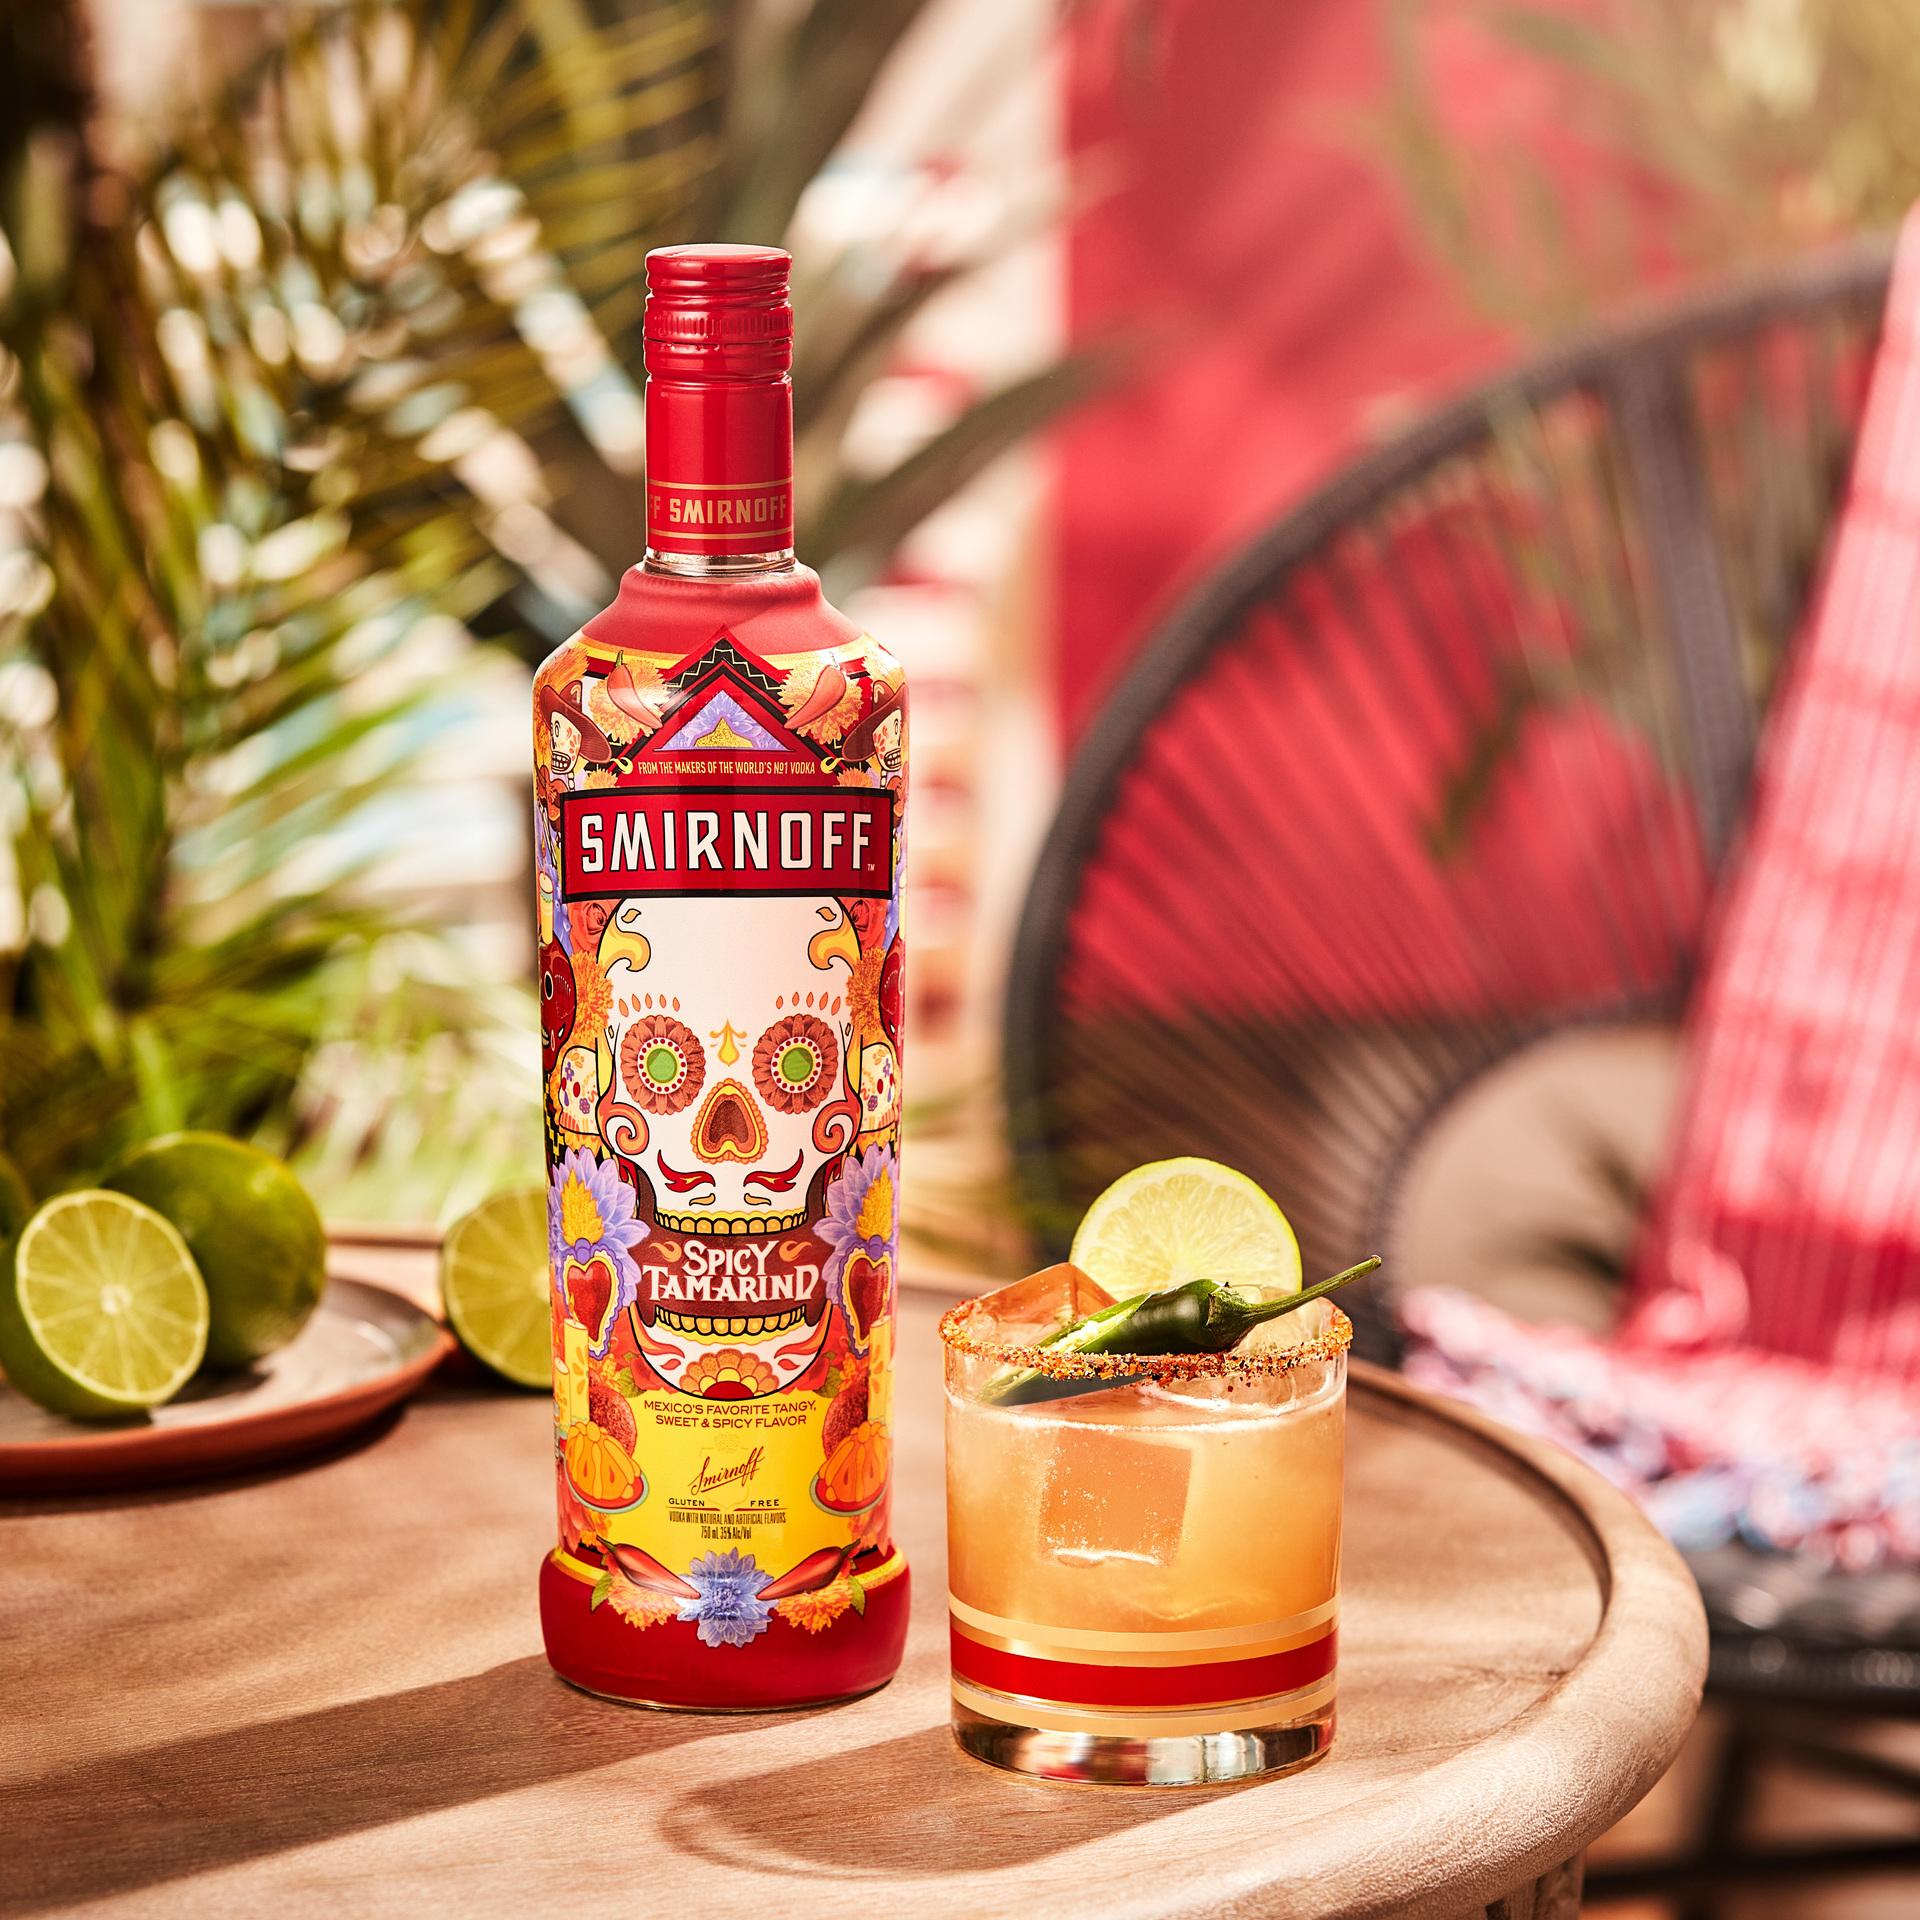 Smirnoff Spicy Tamarind vodka bottle alongside a Spicy Tama-rita cocktail, our take on the classic margarita  with a spicy seasoning rim,  lime wheel and jalepeno for garnish. 